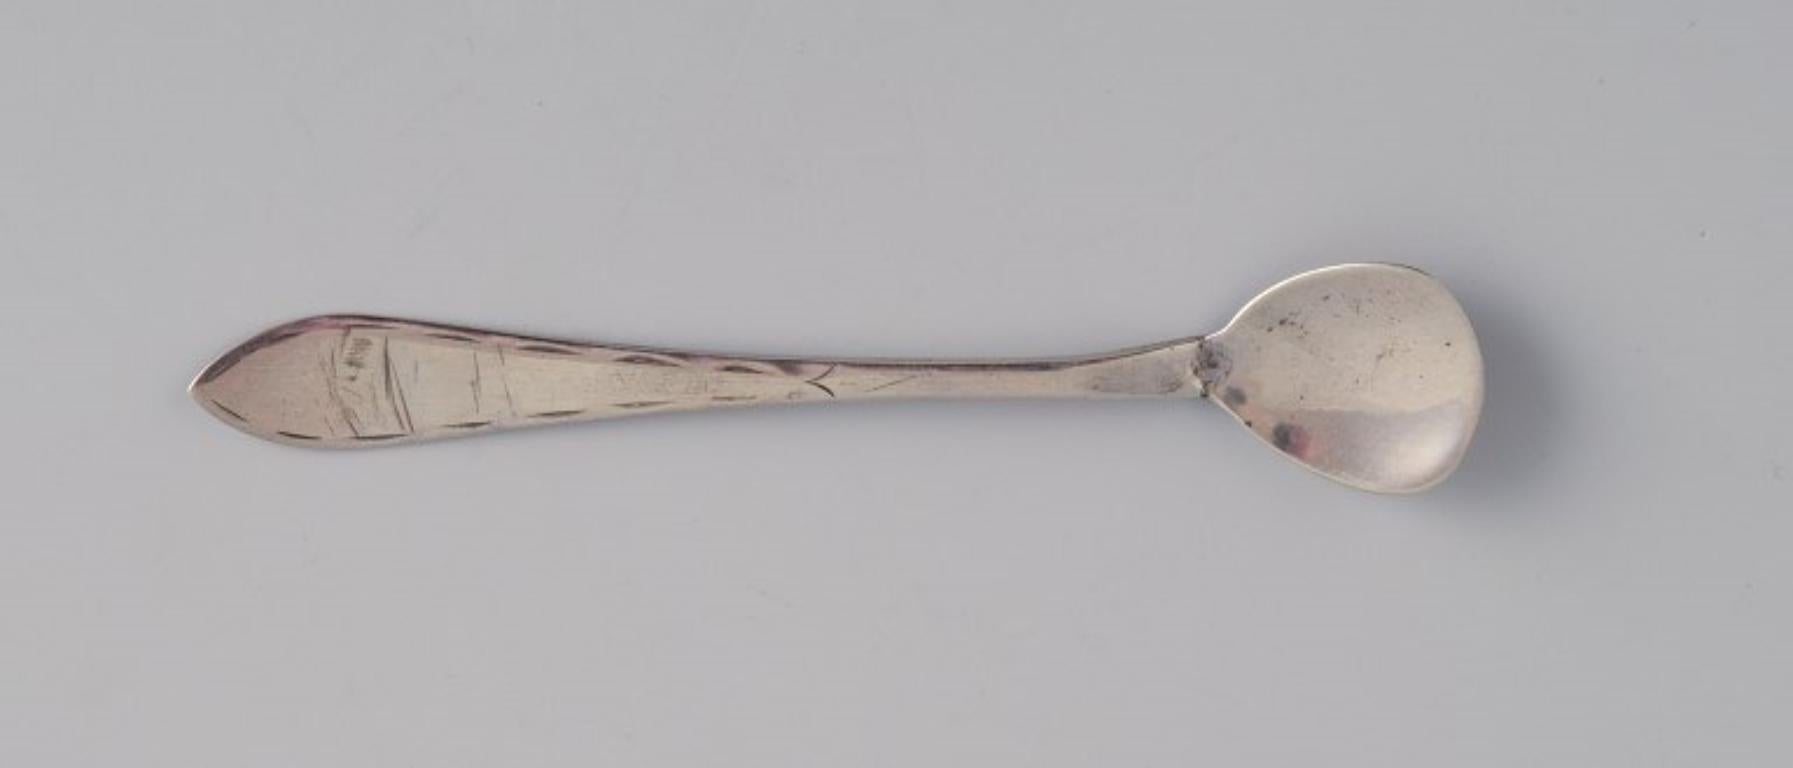 A set of four Scandinavian salt spoons in silver.
19th century.
Marked.
In excellent condition.
Longest dimensions: L 8.3 cm.